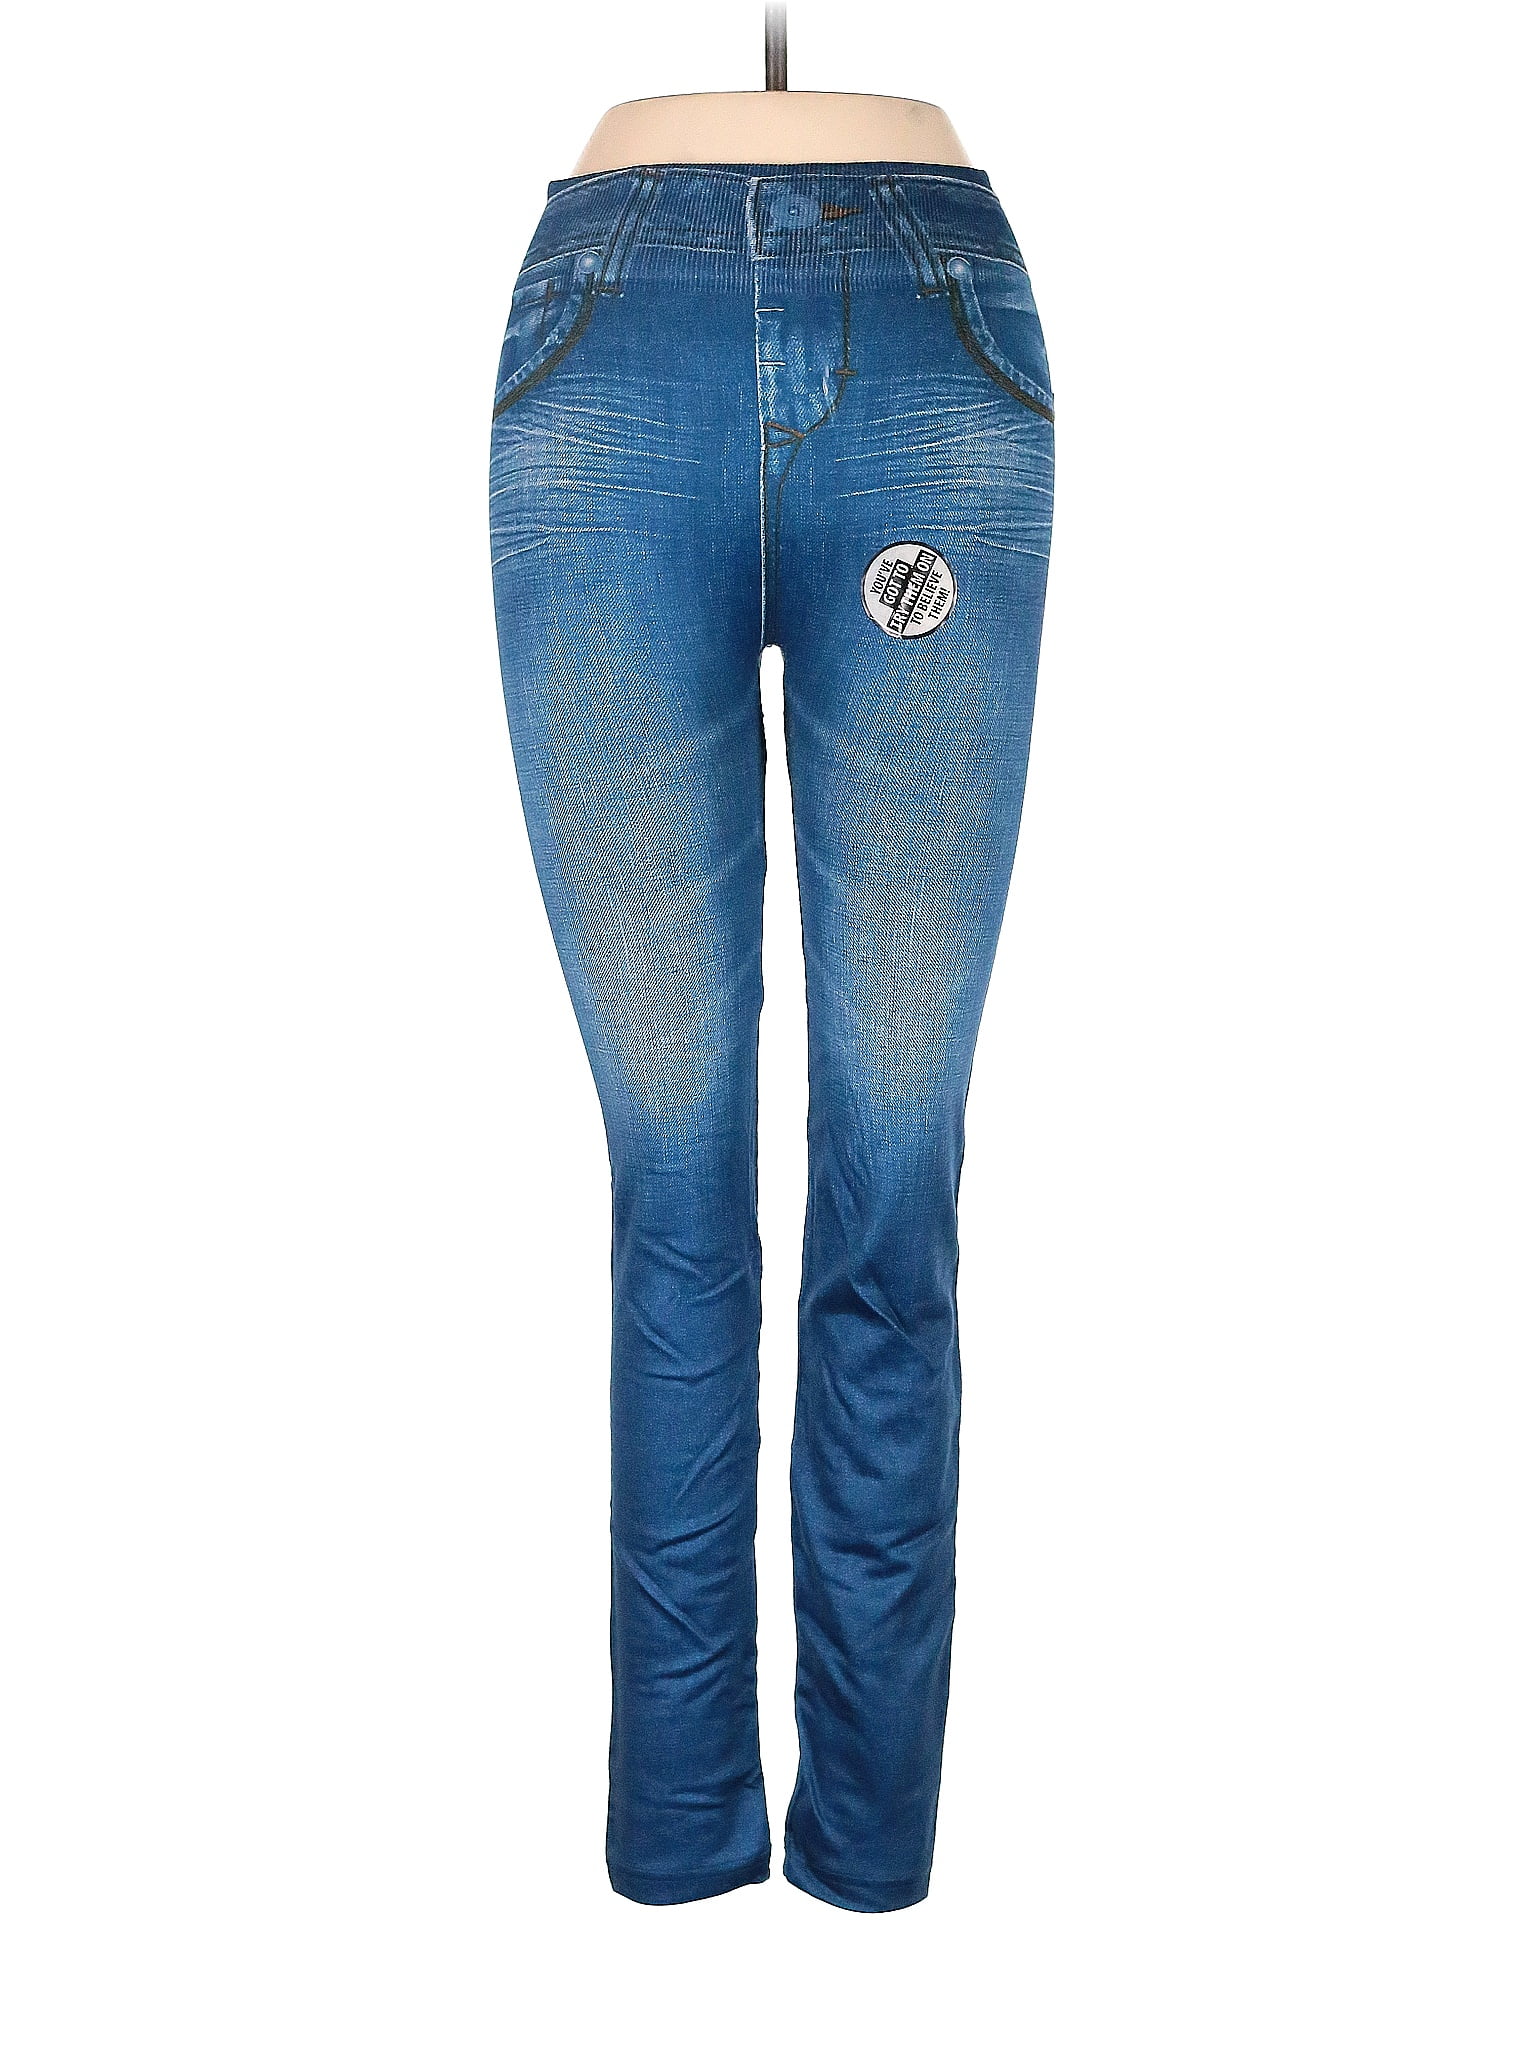 Genie Women's Jeans On Sale Up To 90% Off Retail